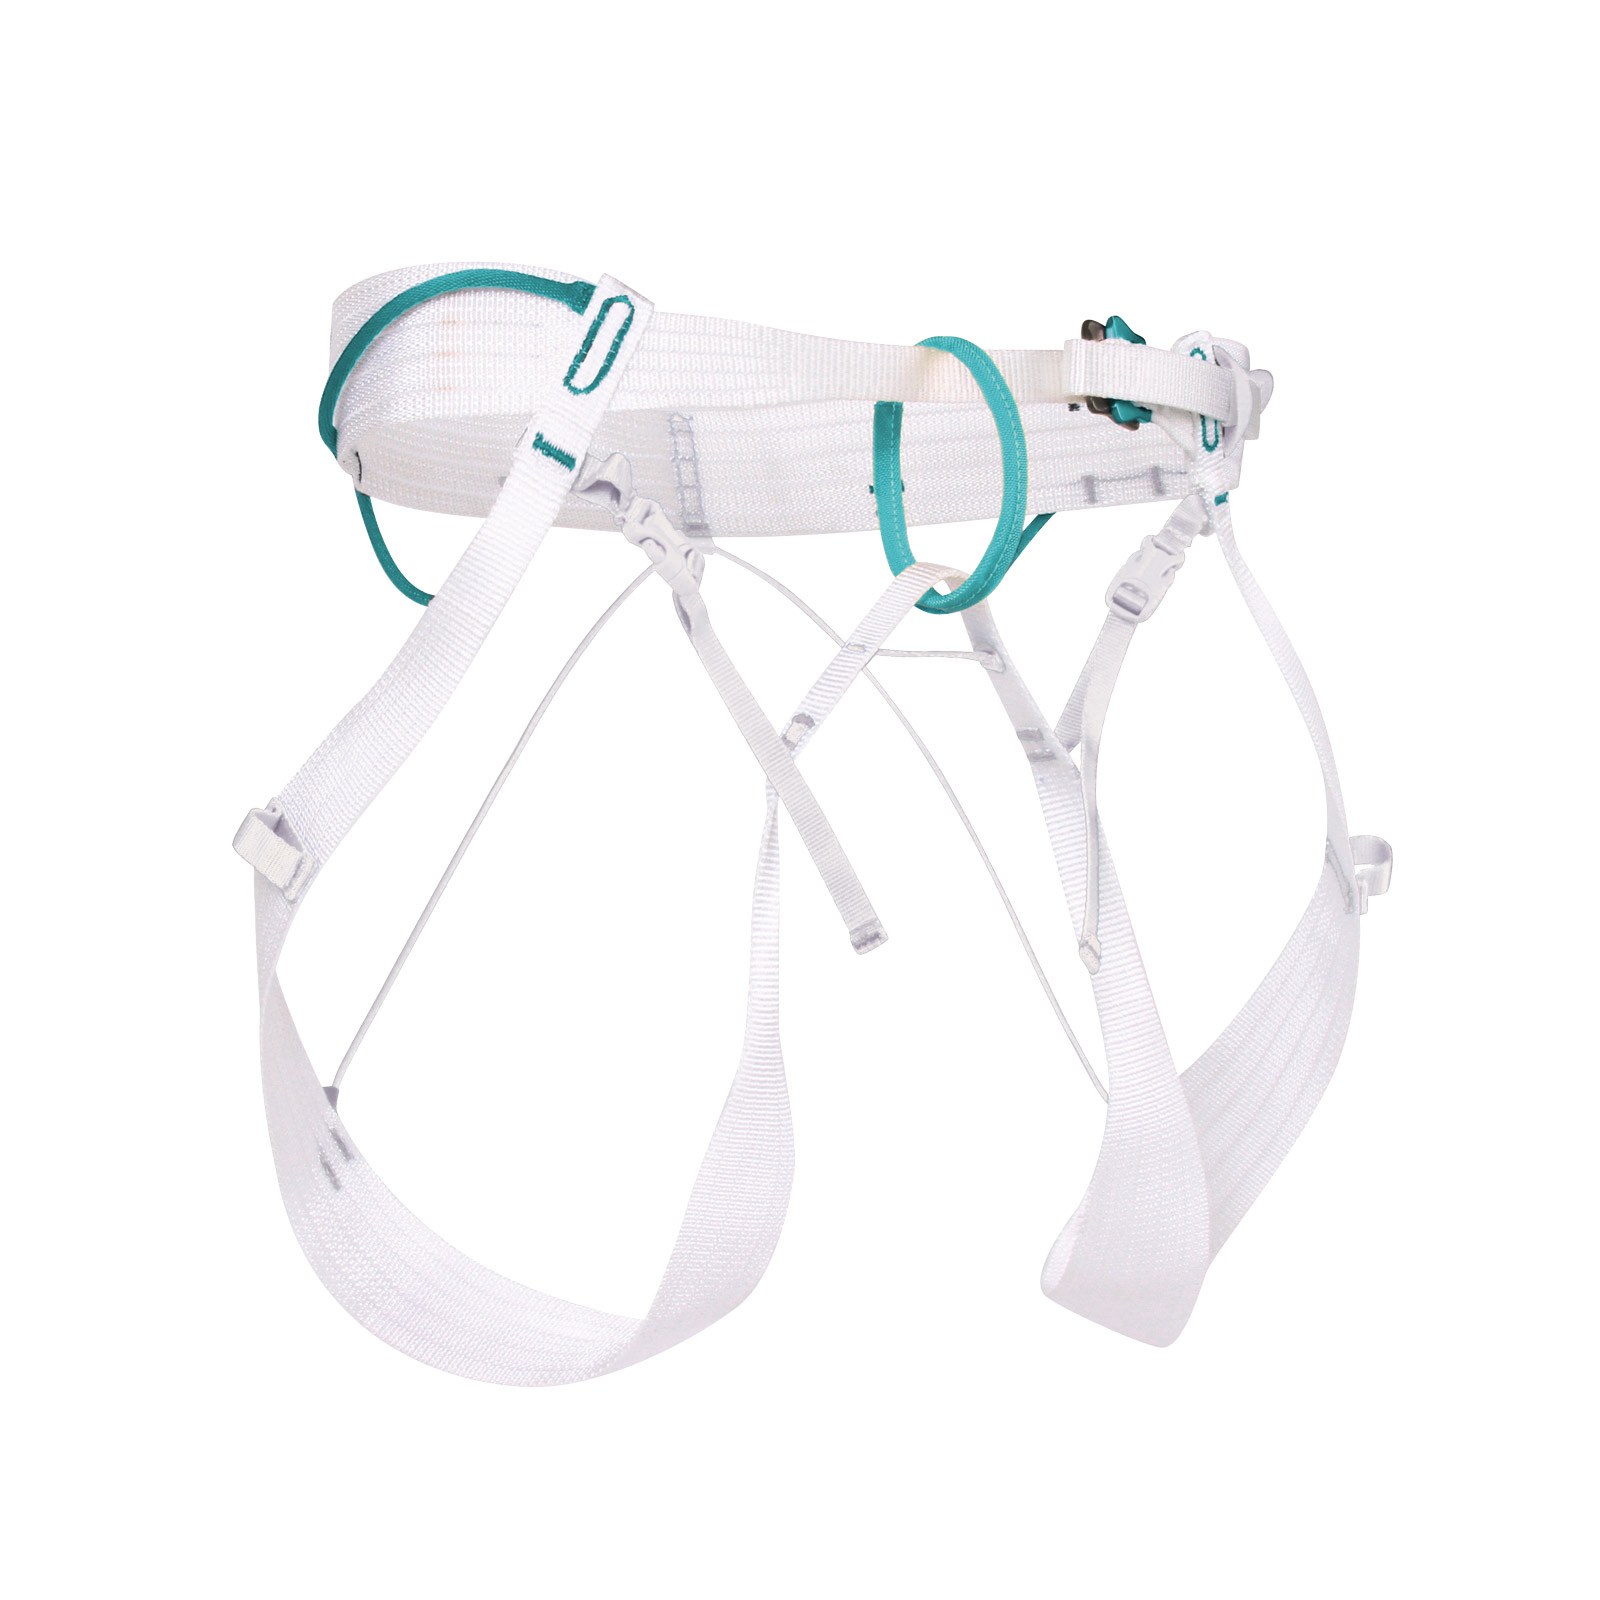 Ultralight harnesses for mountaineering and skiing- Switzerland